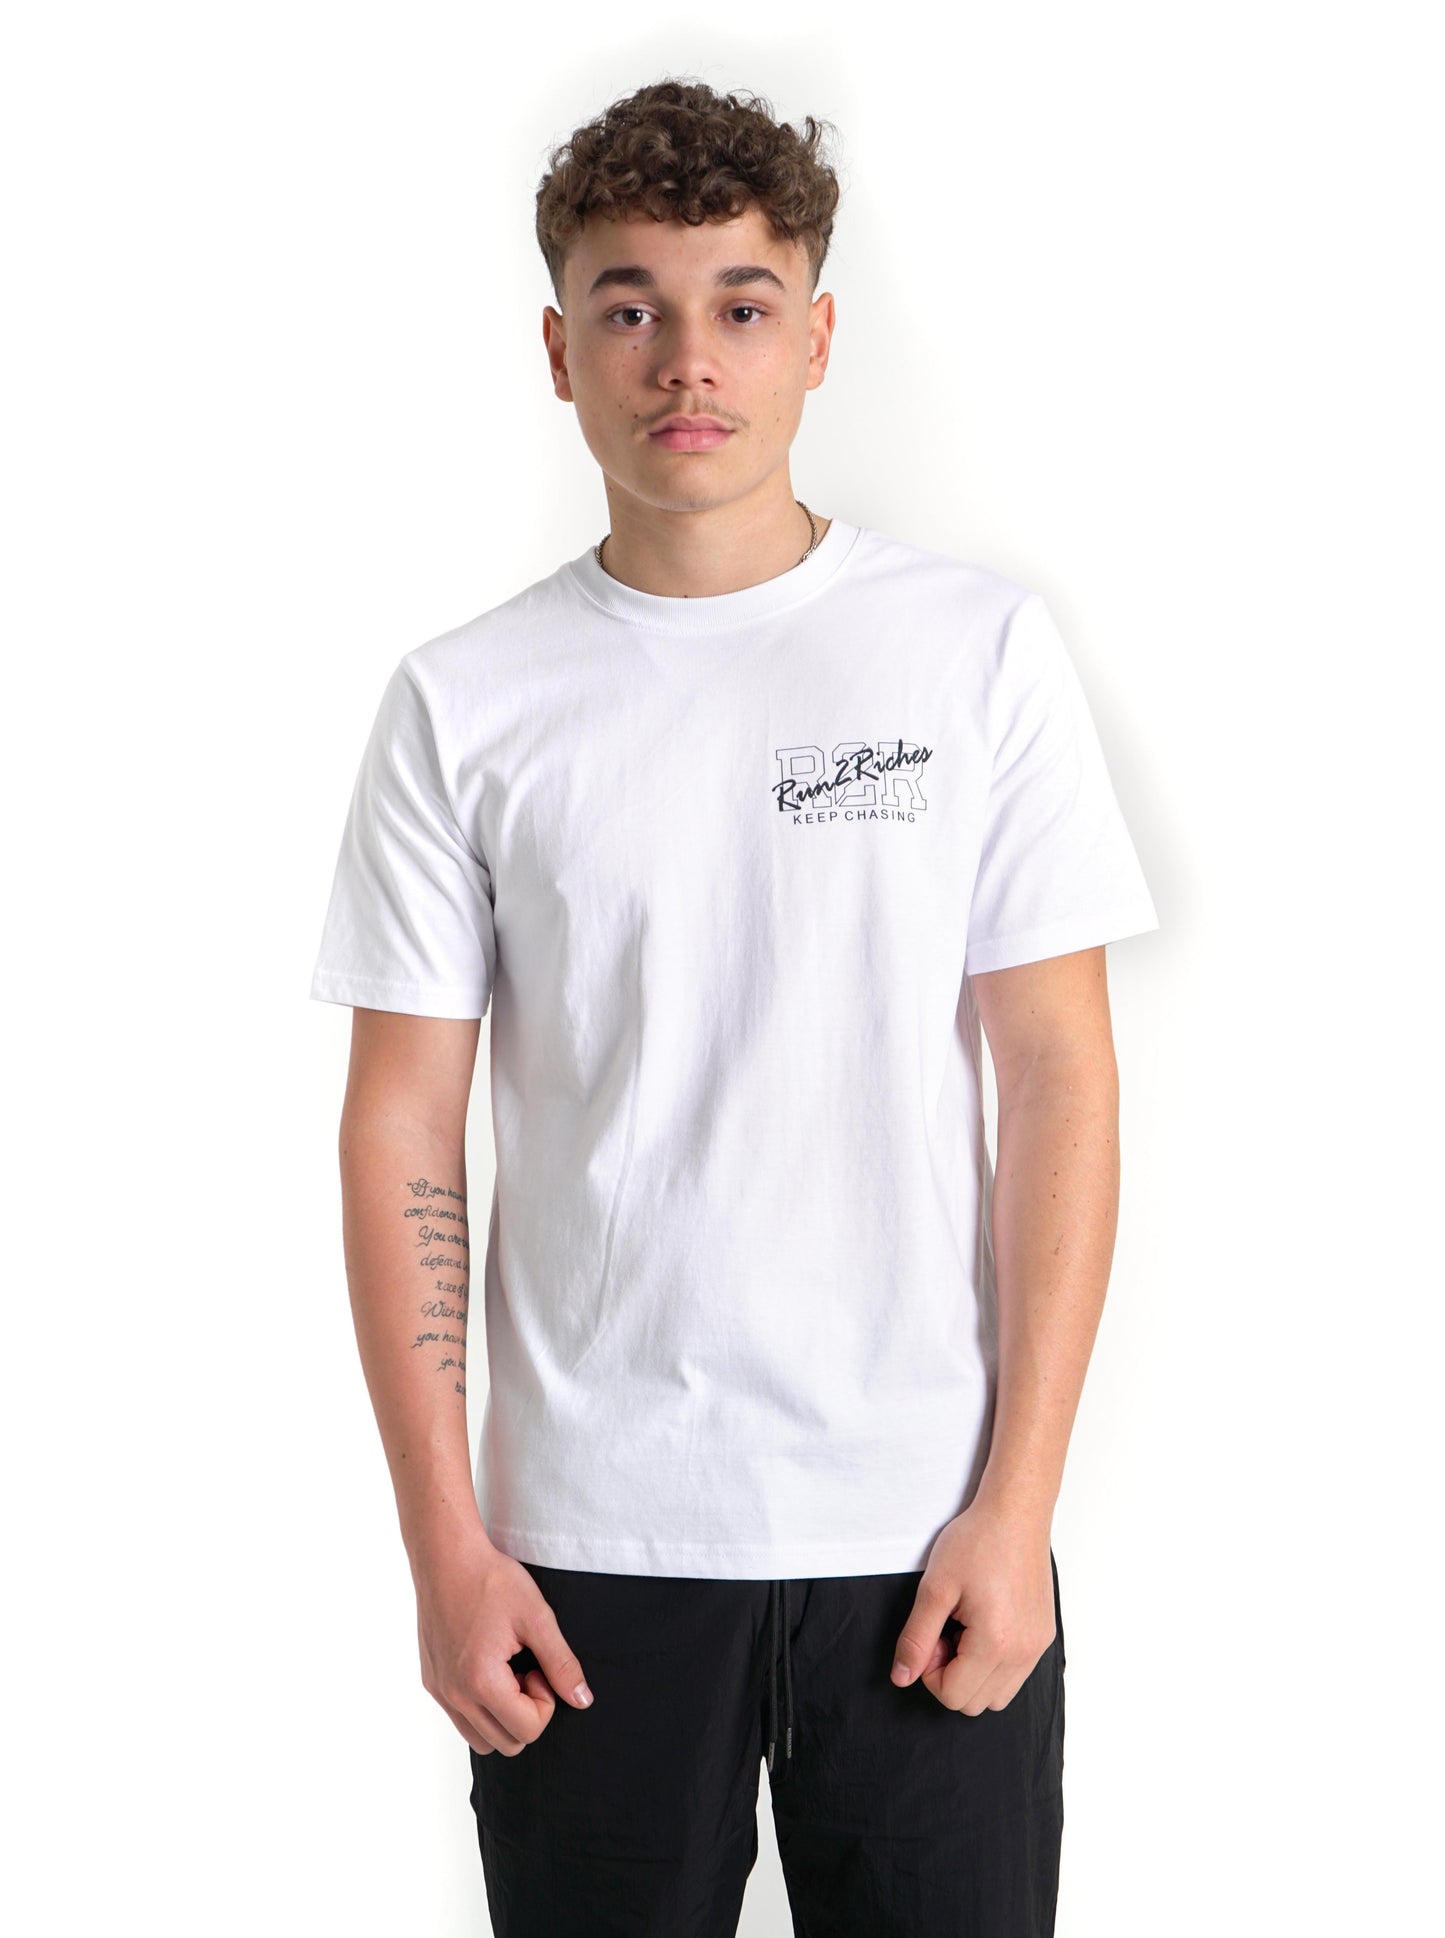 R2R CONTRACT T-SHIRT - WHITE/BLACK